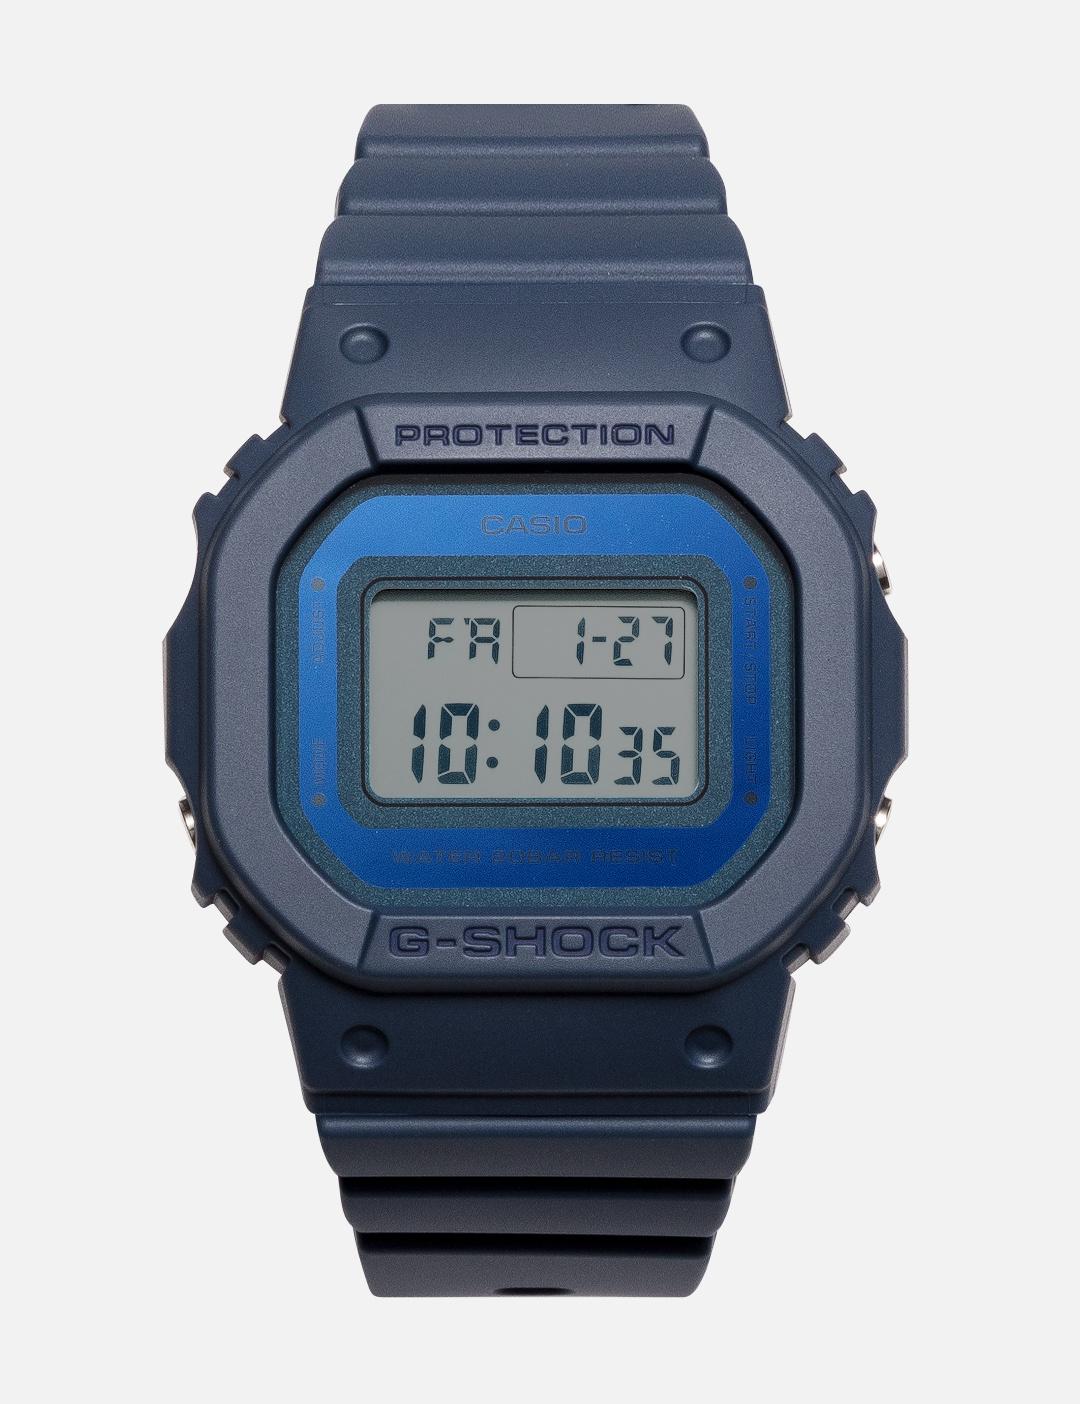 GMD-S5600-2 by CASIO